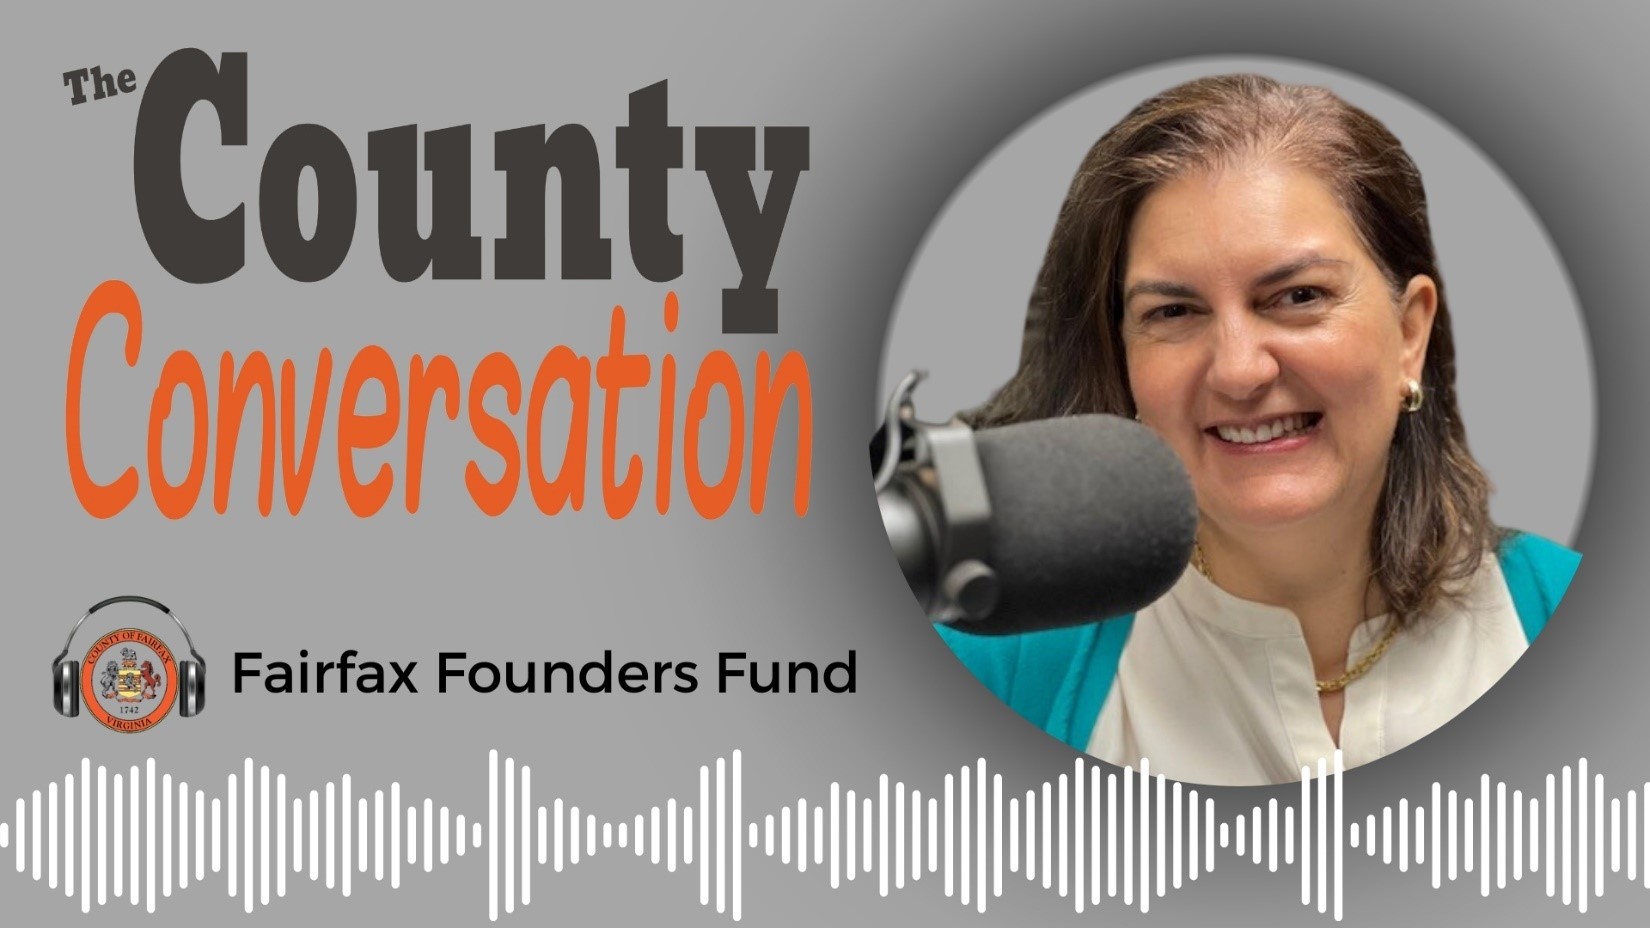 The County Conversation - Fairfax Founders Fund